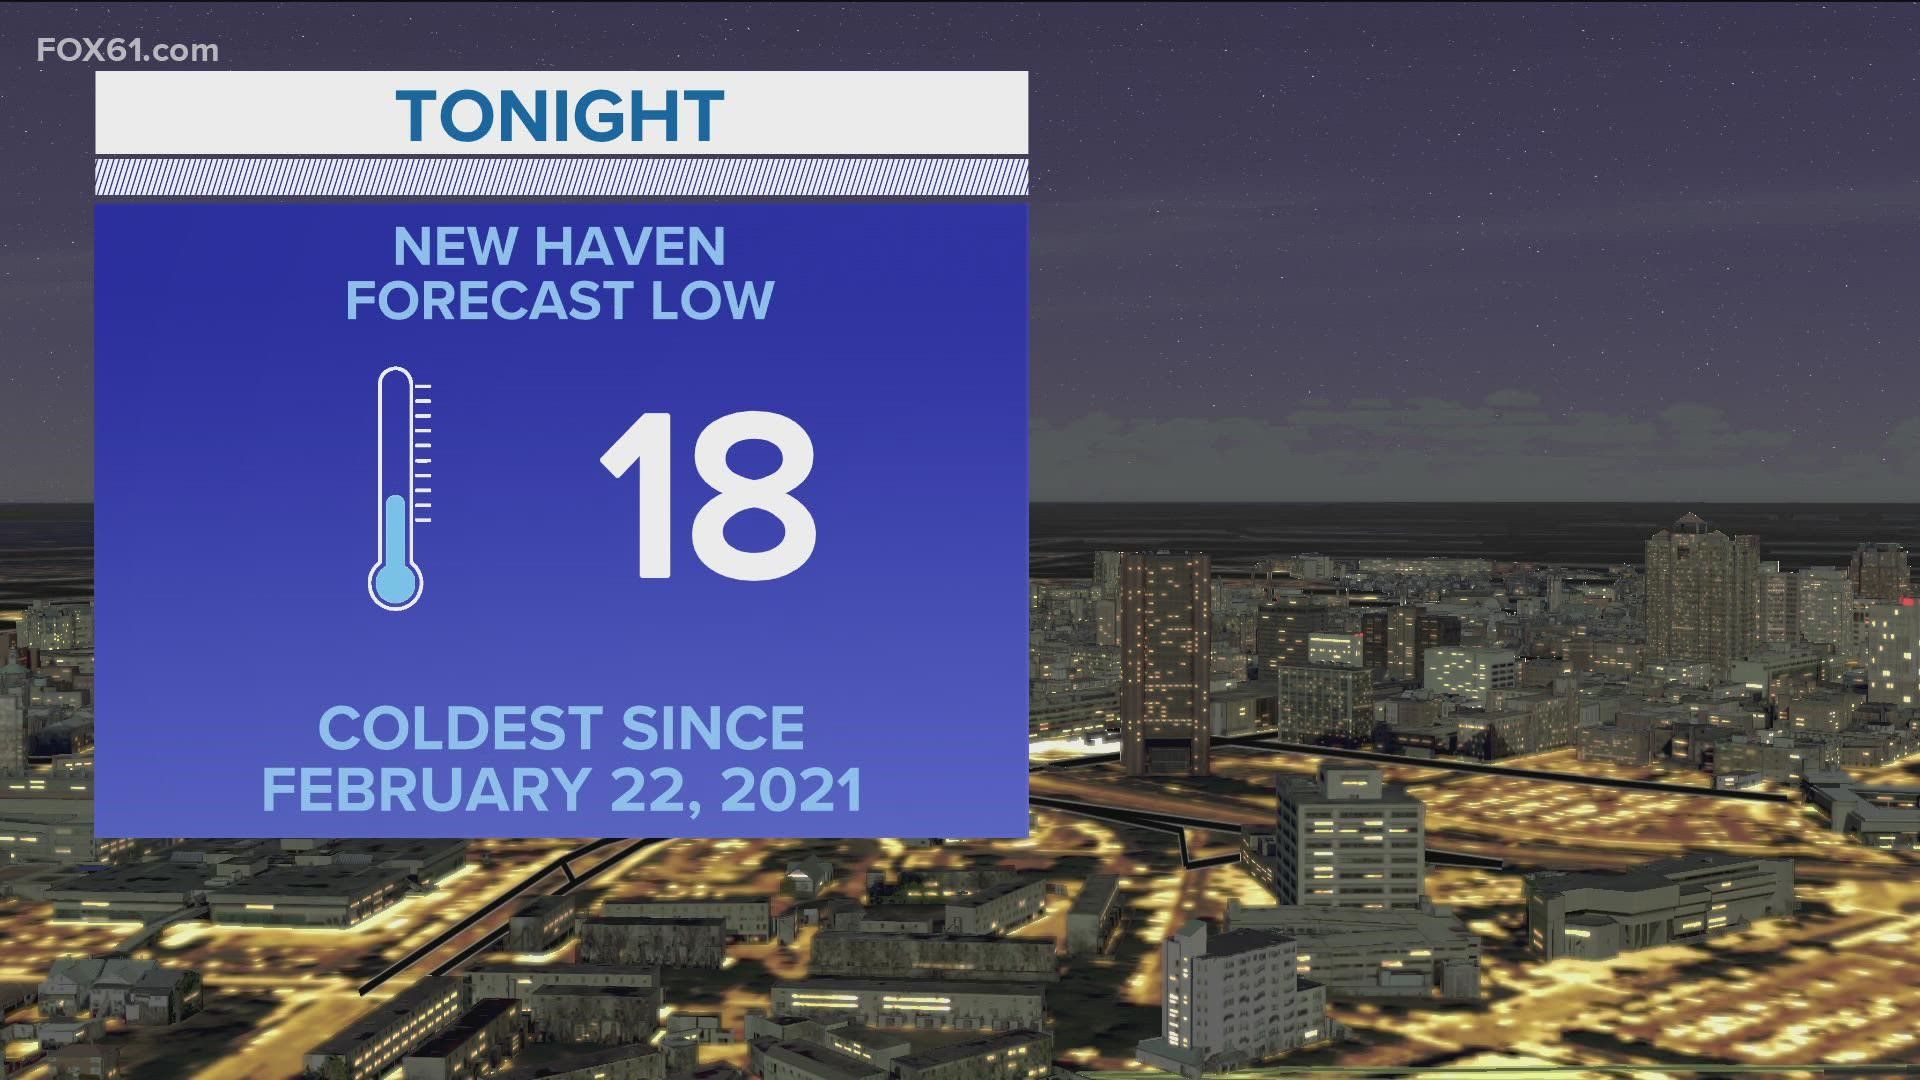 Jan 3, 2022 will be the coldest night in Connecticut since last season